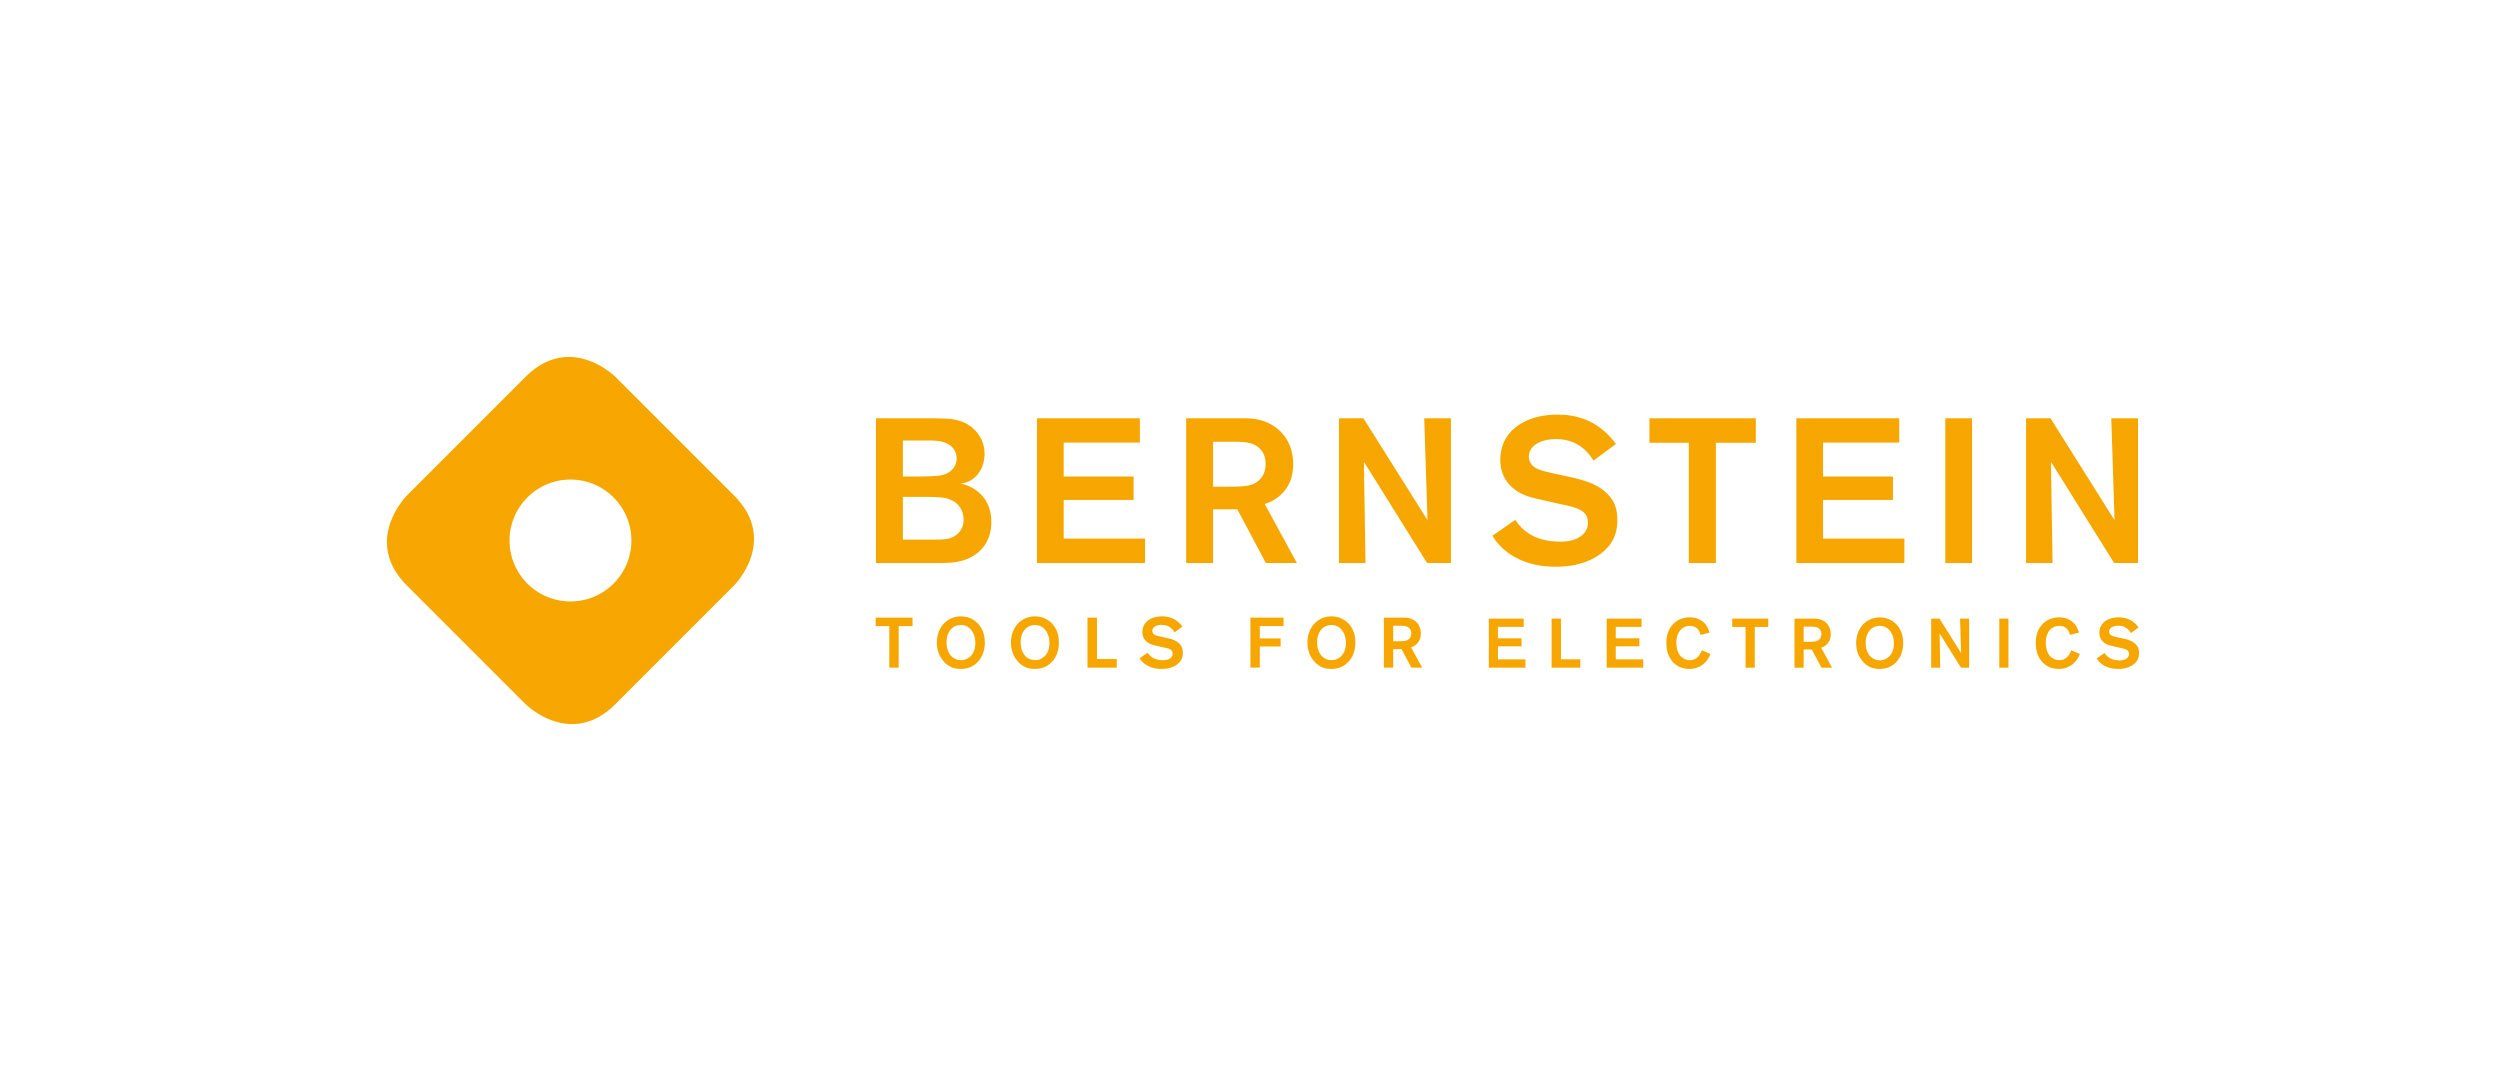 BERNSTEIN TOOLS FOR ELECTRONICS